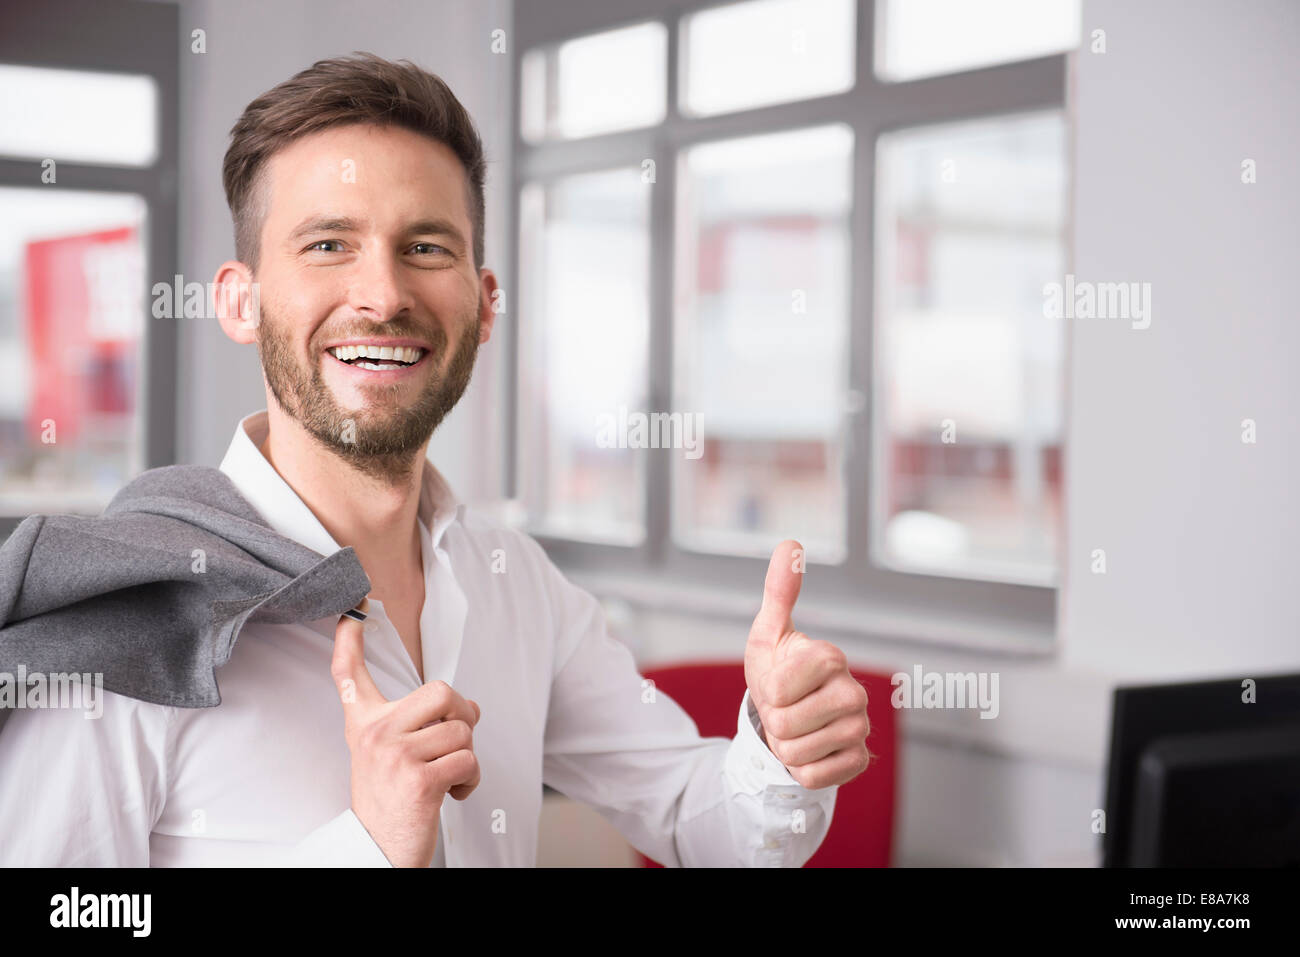 Jeune homme office Thumbs up sign smiling Banque D'Images